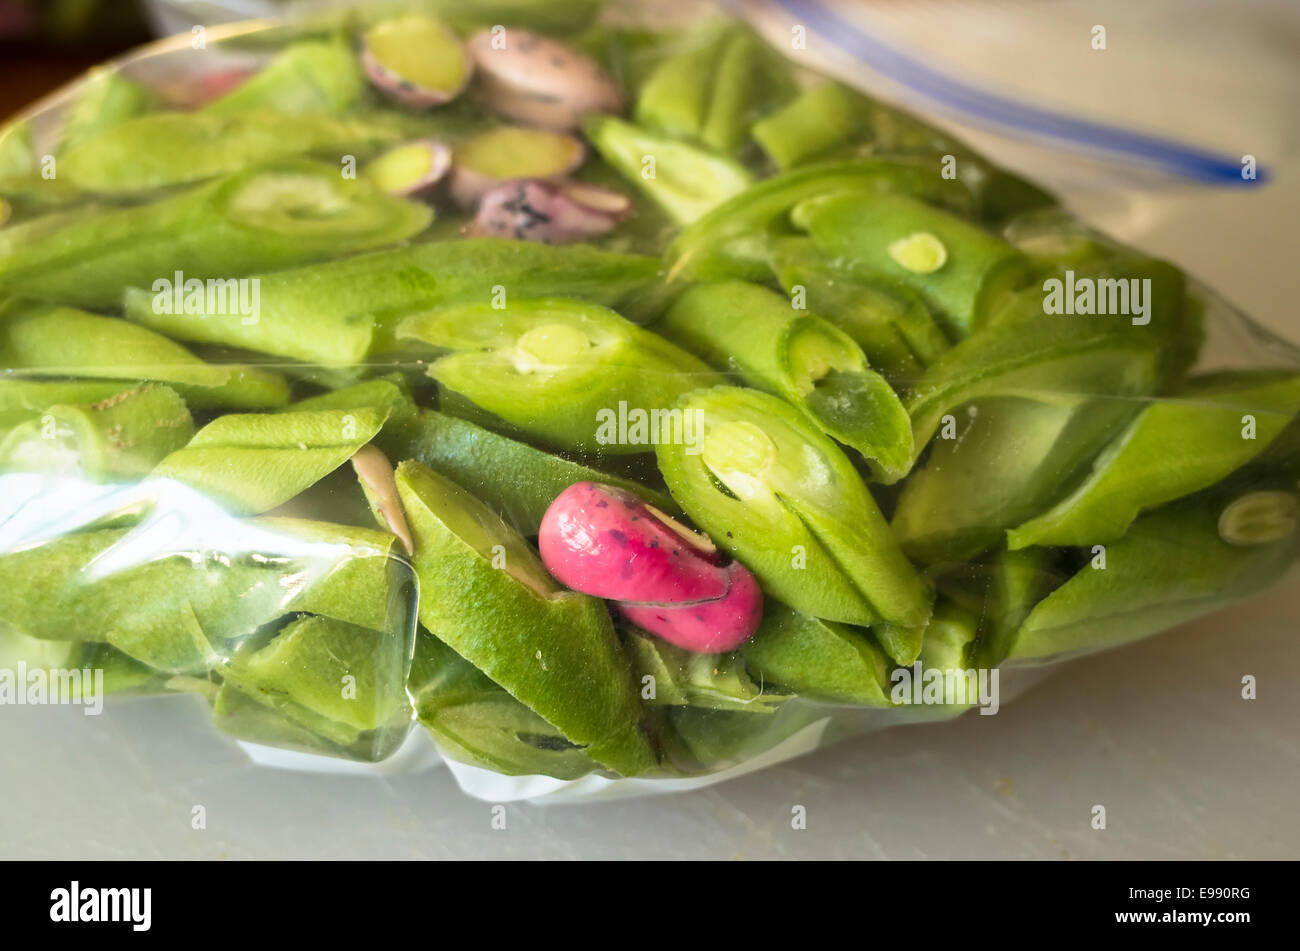 Runner beans cut and wrapped ready for freezing Stock Photo